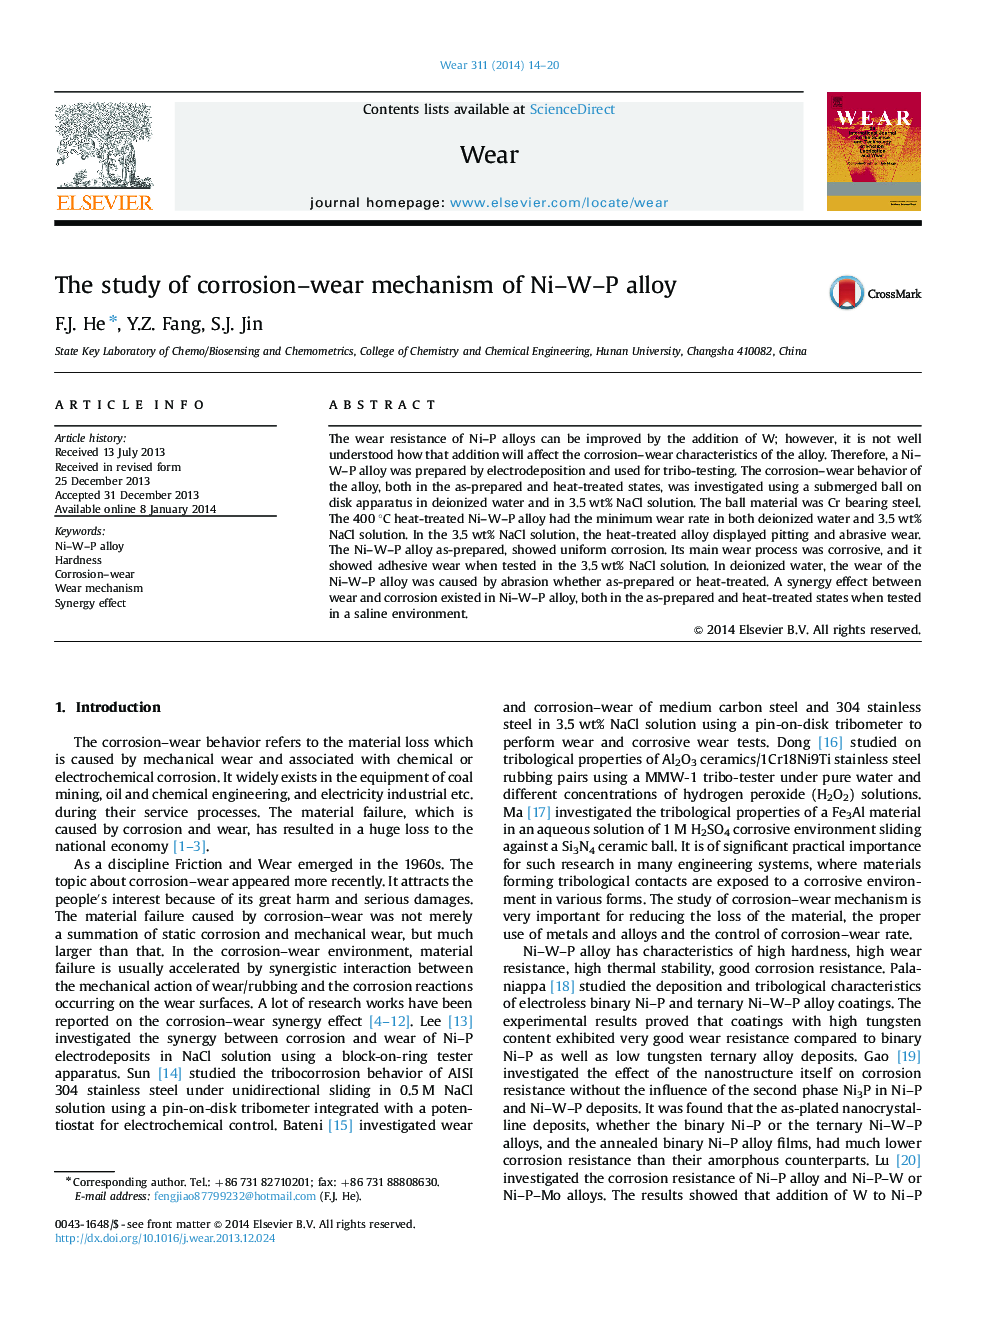 The study of corrosion–wear mechanism of Ni–W–P alloy